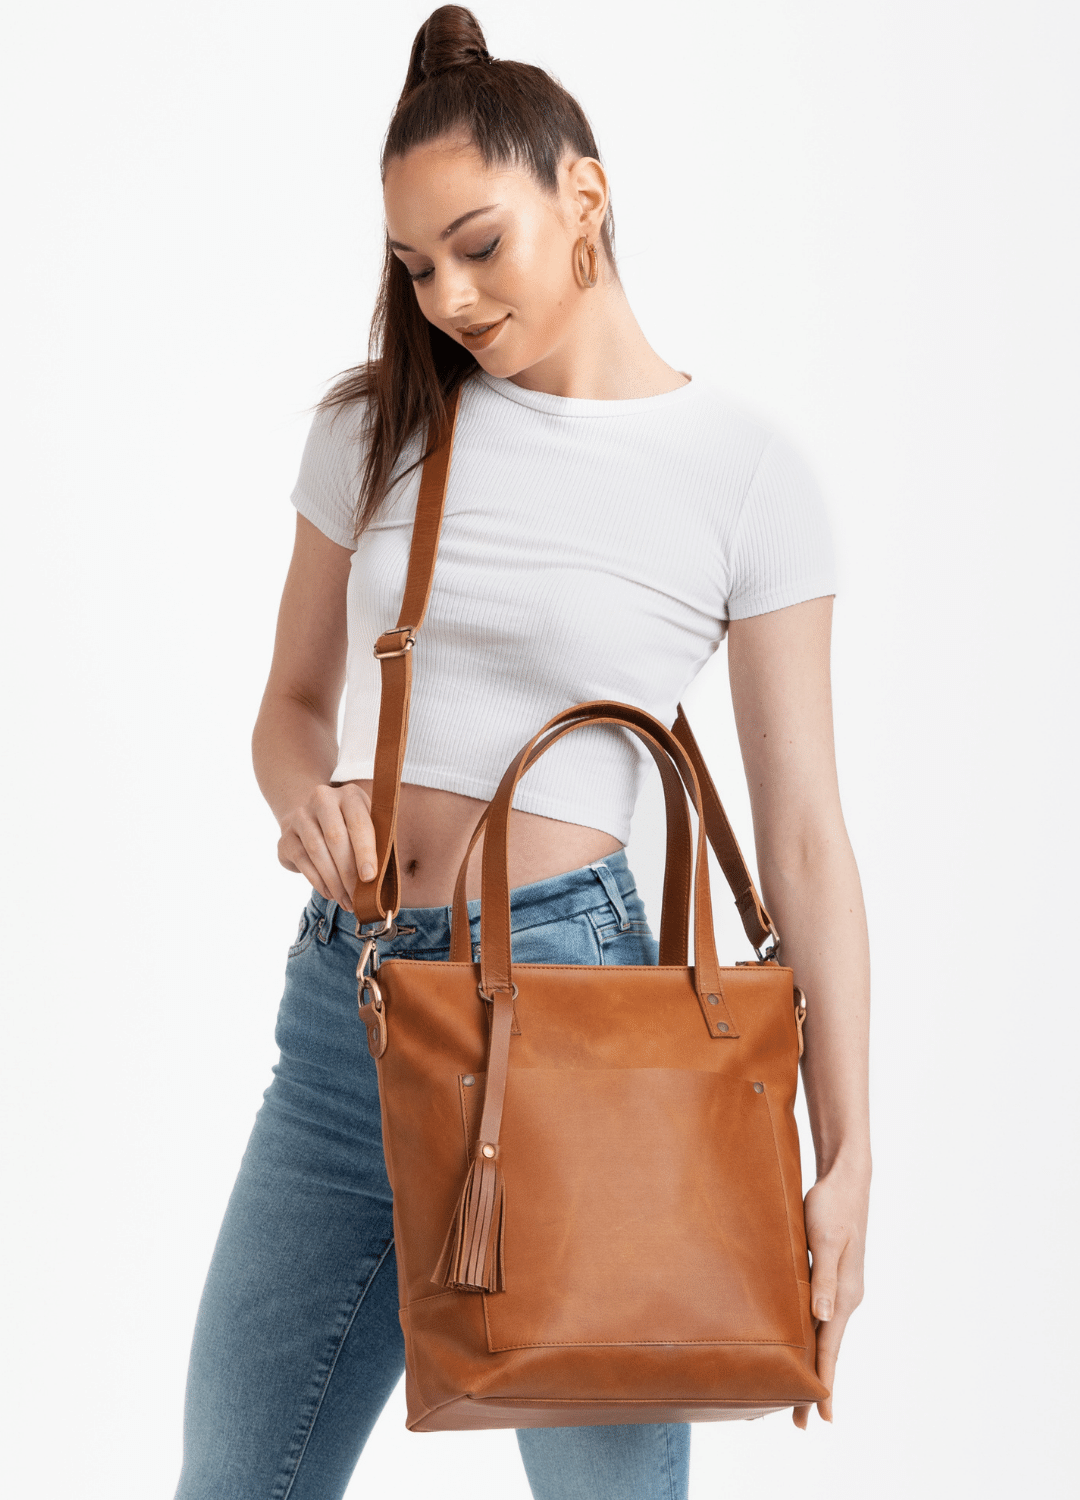 Leather Saddlebags: Buy Premium Leather Vintage Bags For Men & Women – TLB  - The Leather Boutique